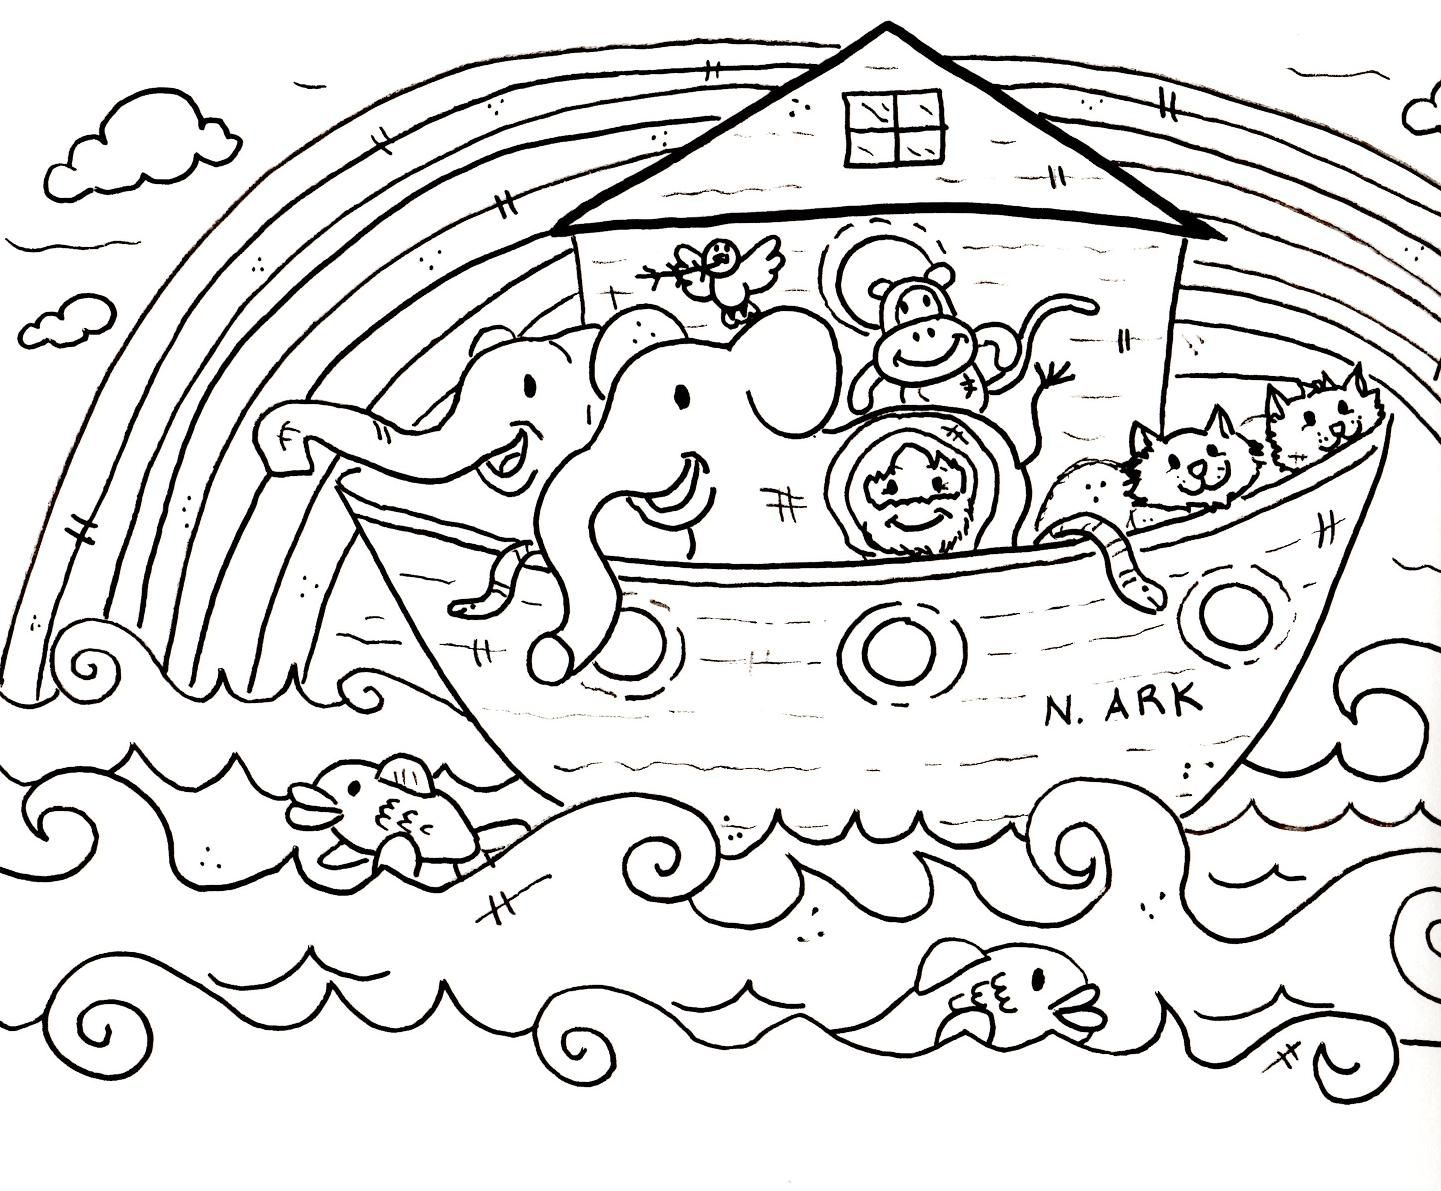 Children Coloring Pages For Church |  Sunday School Coloring - Free Printable Sunday School Coloring Sheets